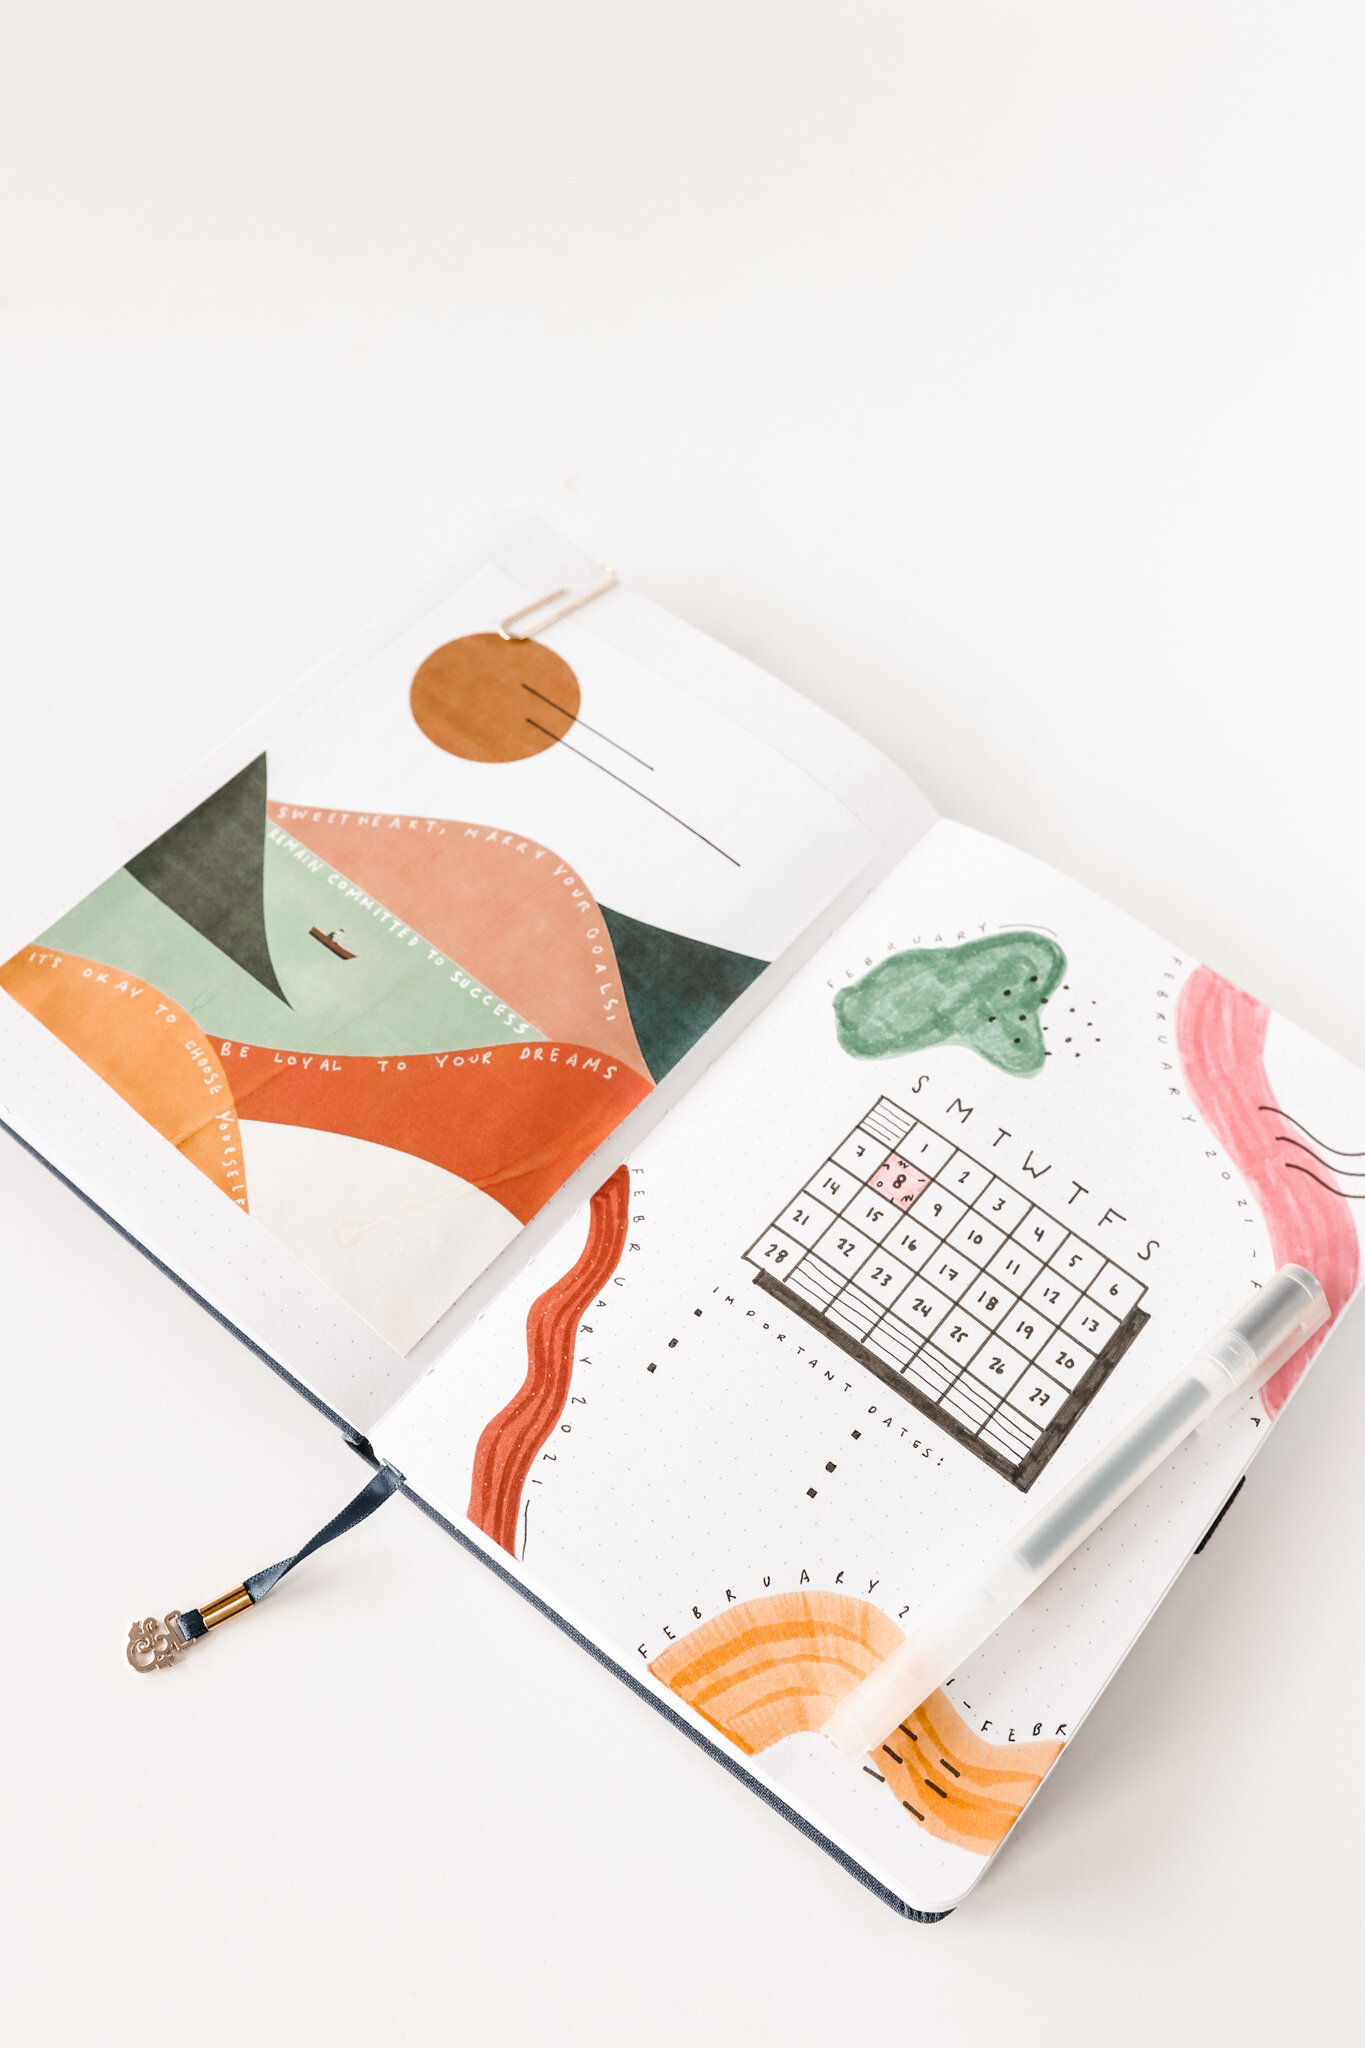 Using the Bullet Journal for Self-Care